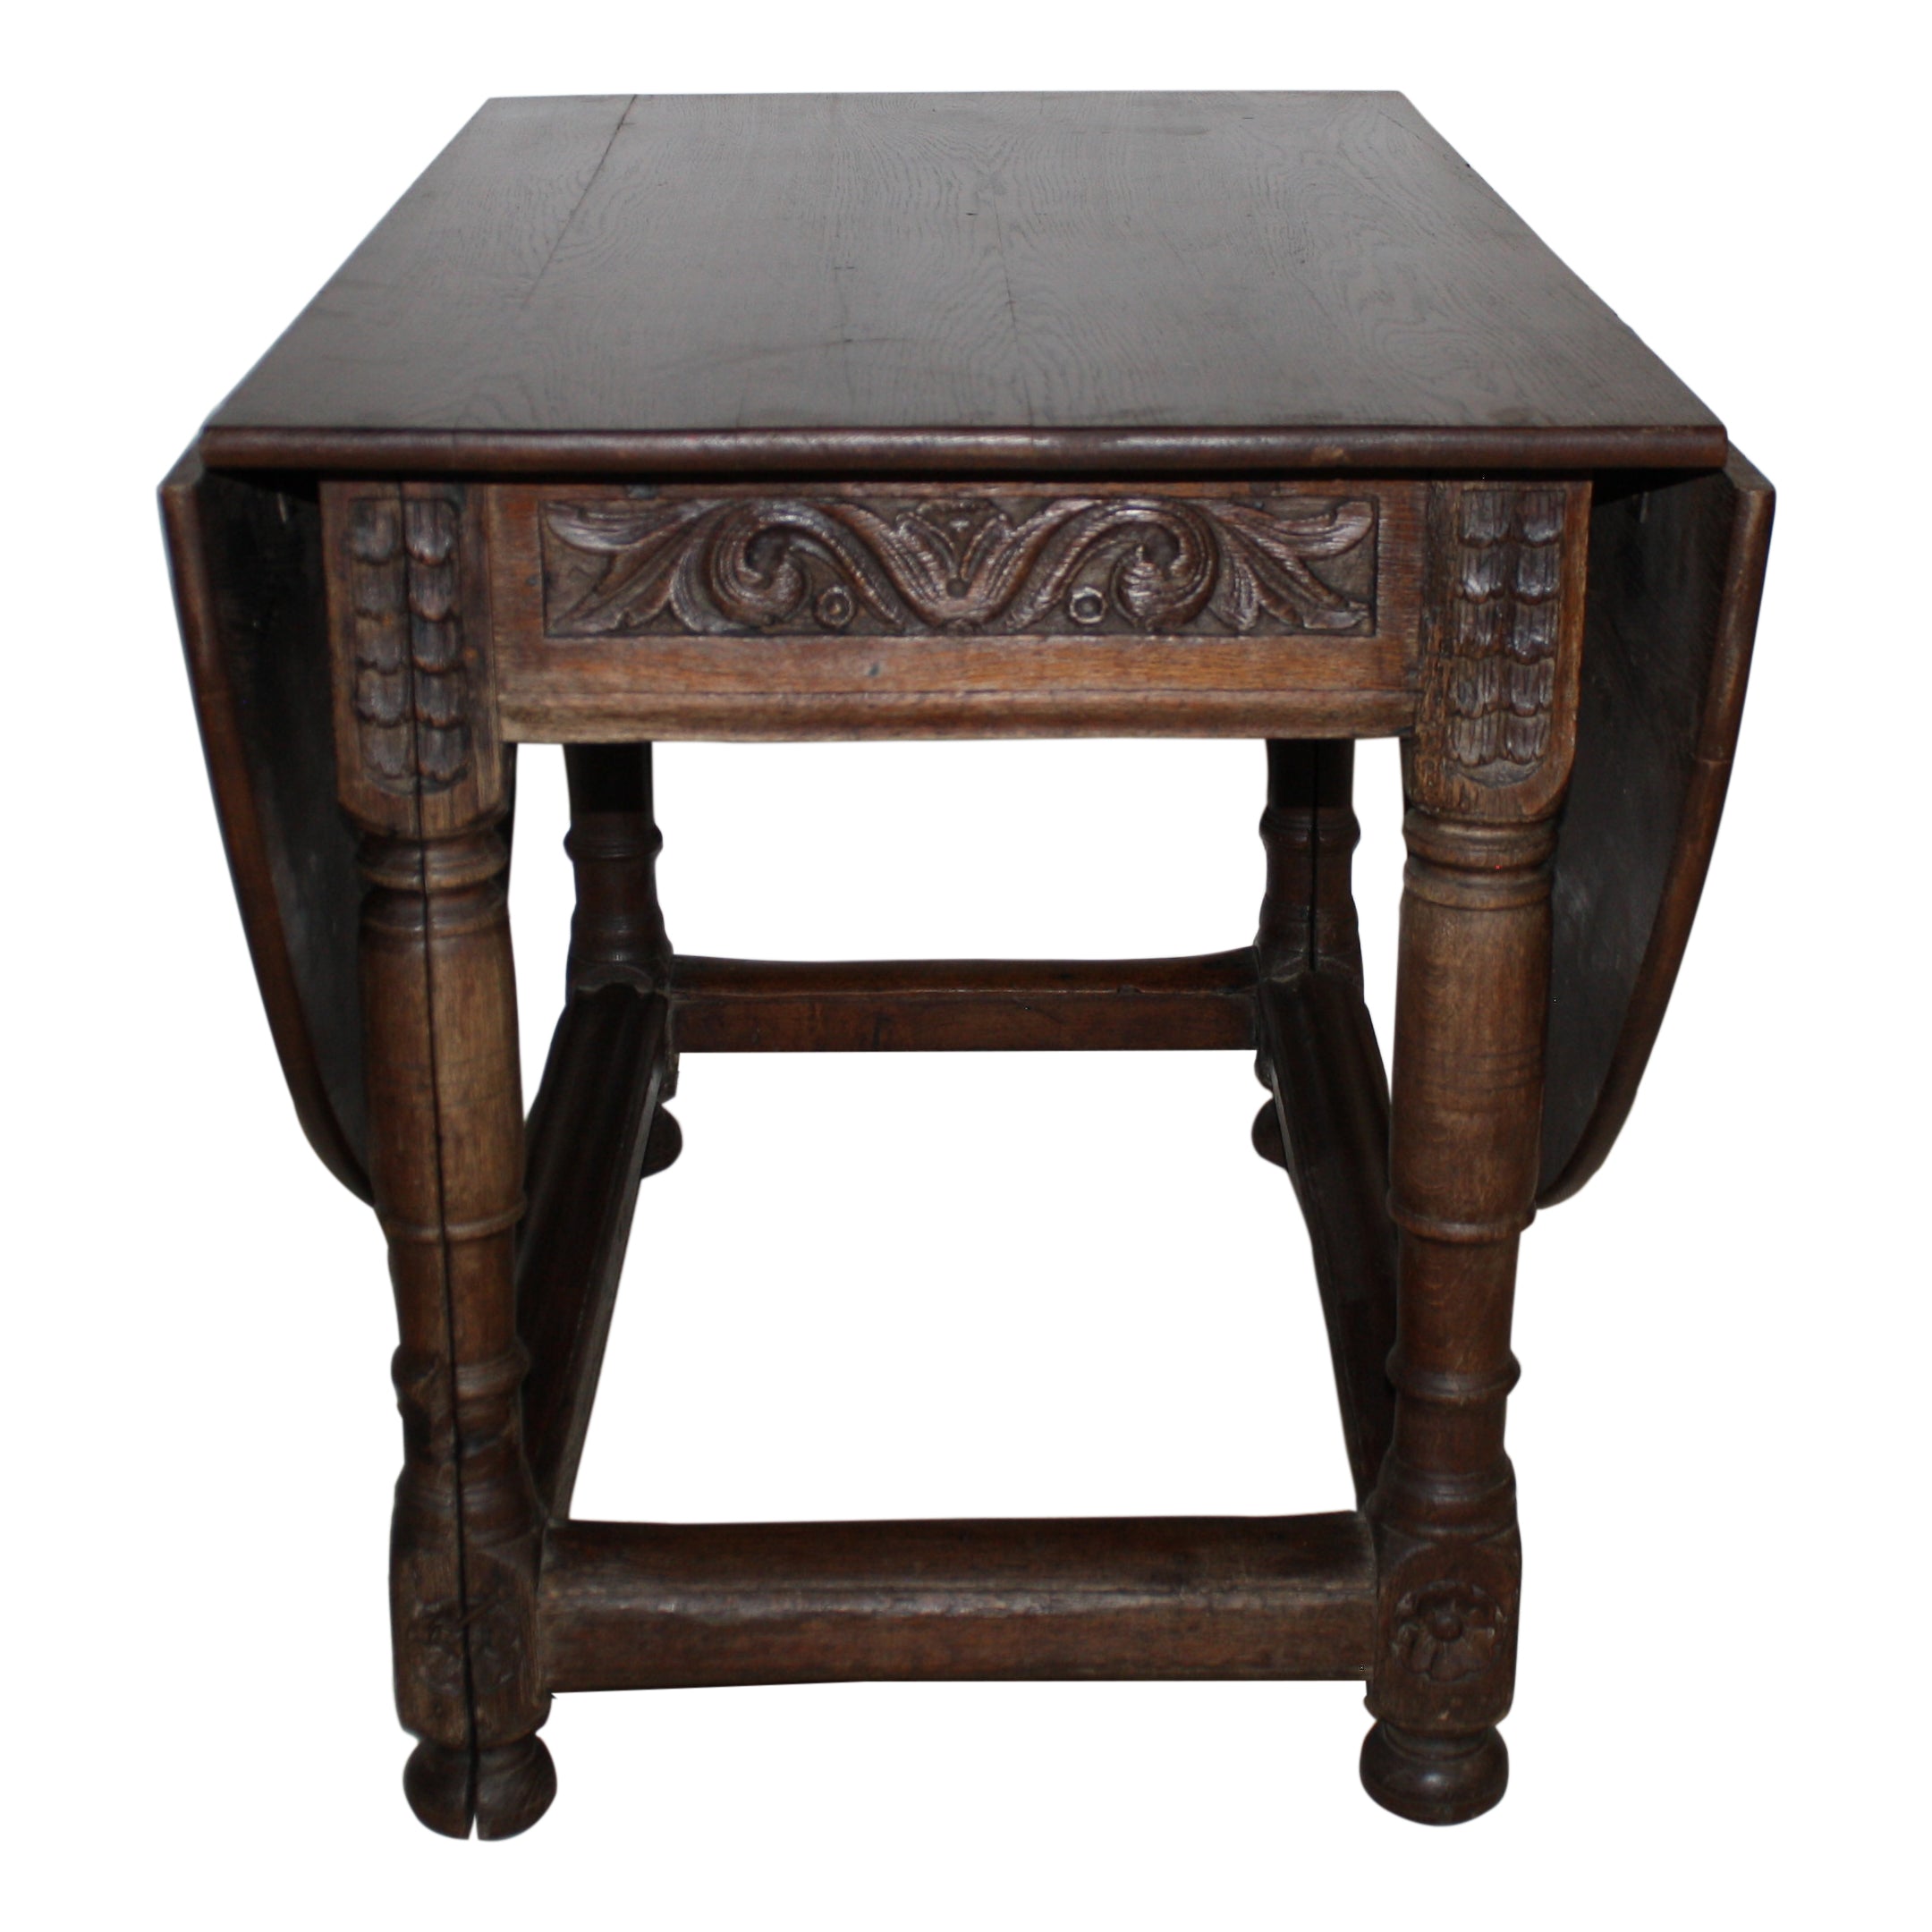 Oak Oval Drop Leaf Table with Drawer